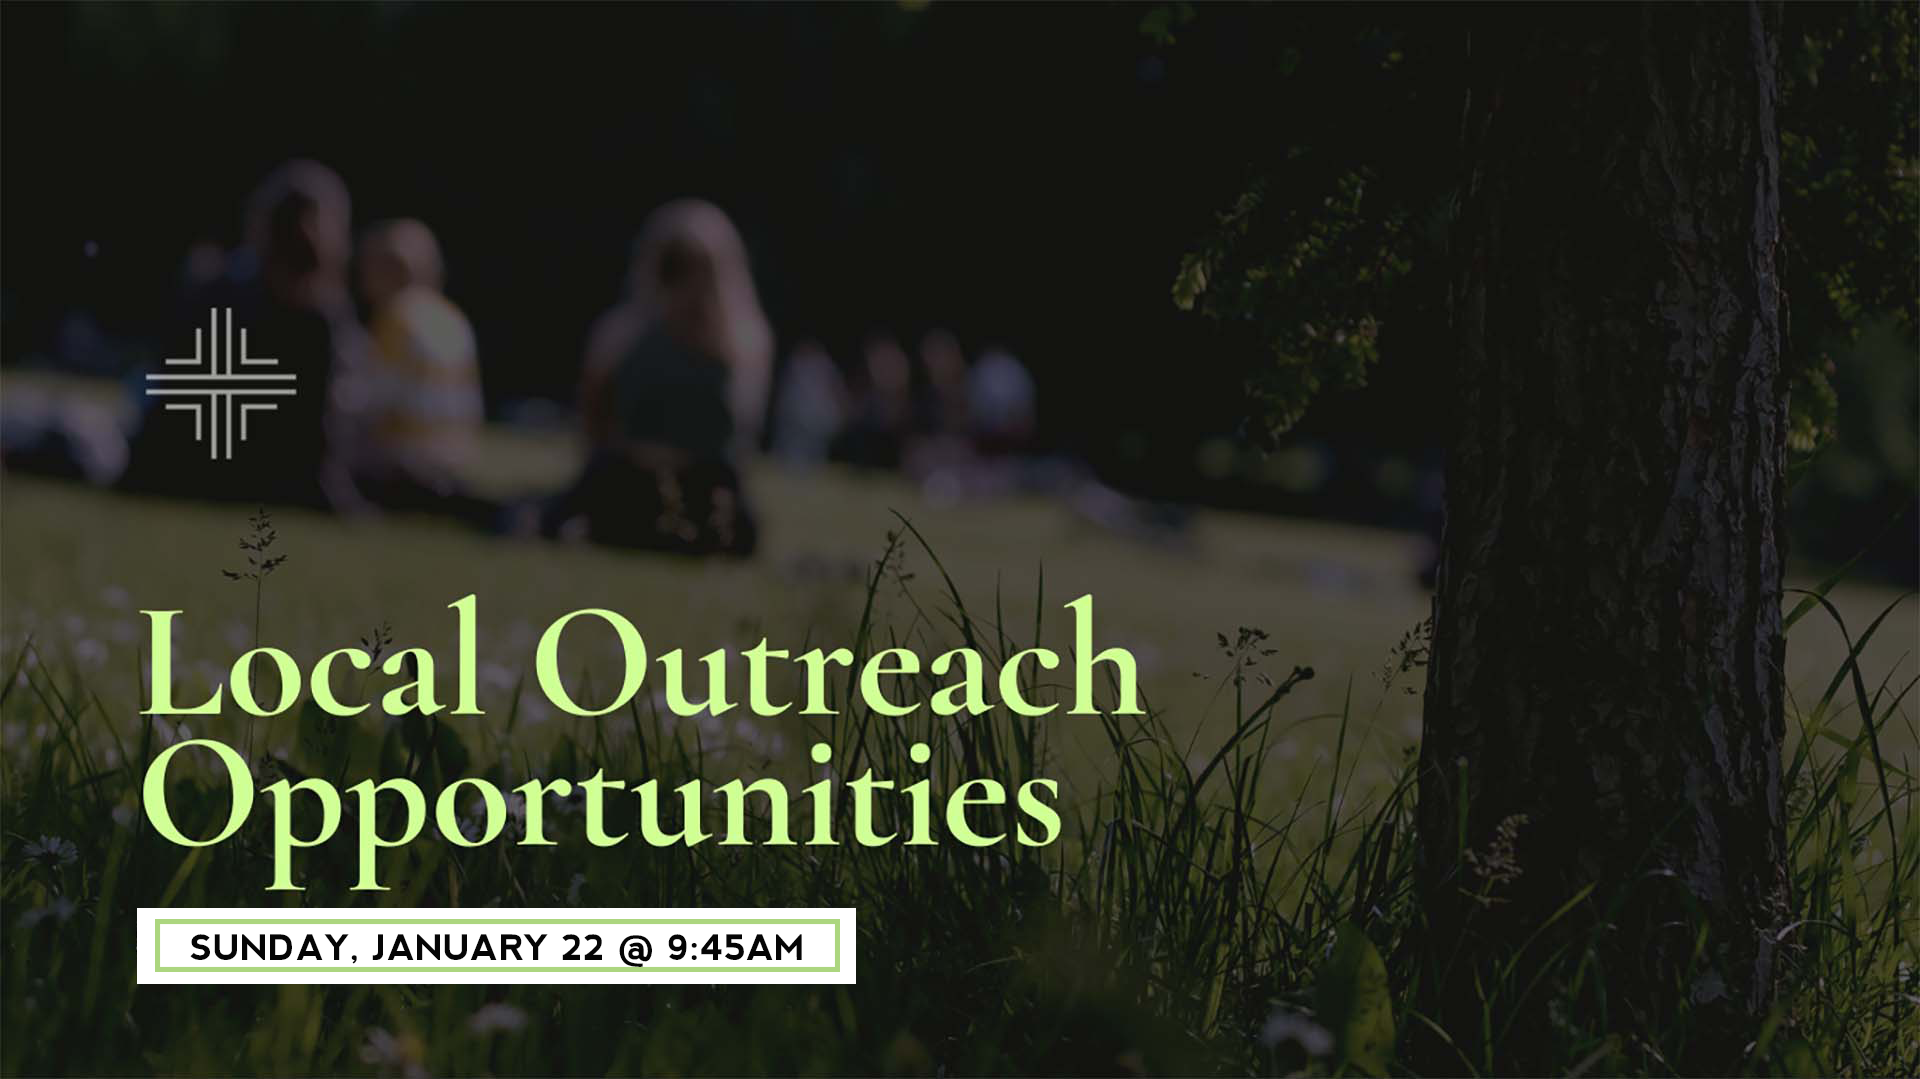 POSTPONED - Local Outreach Opportunities